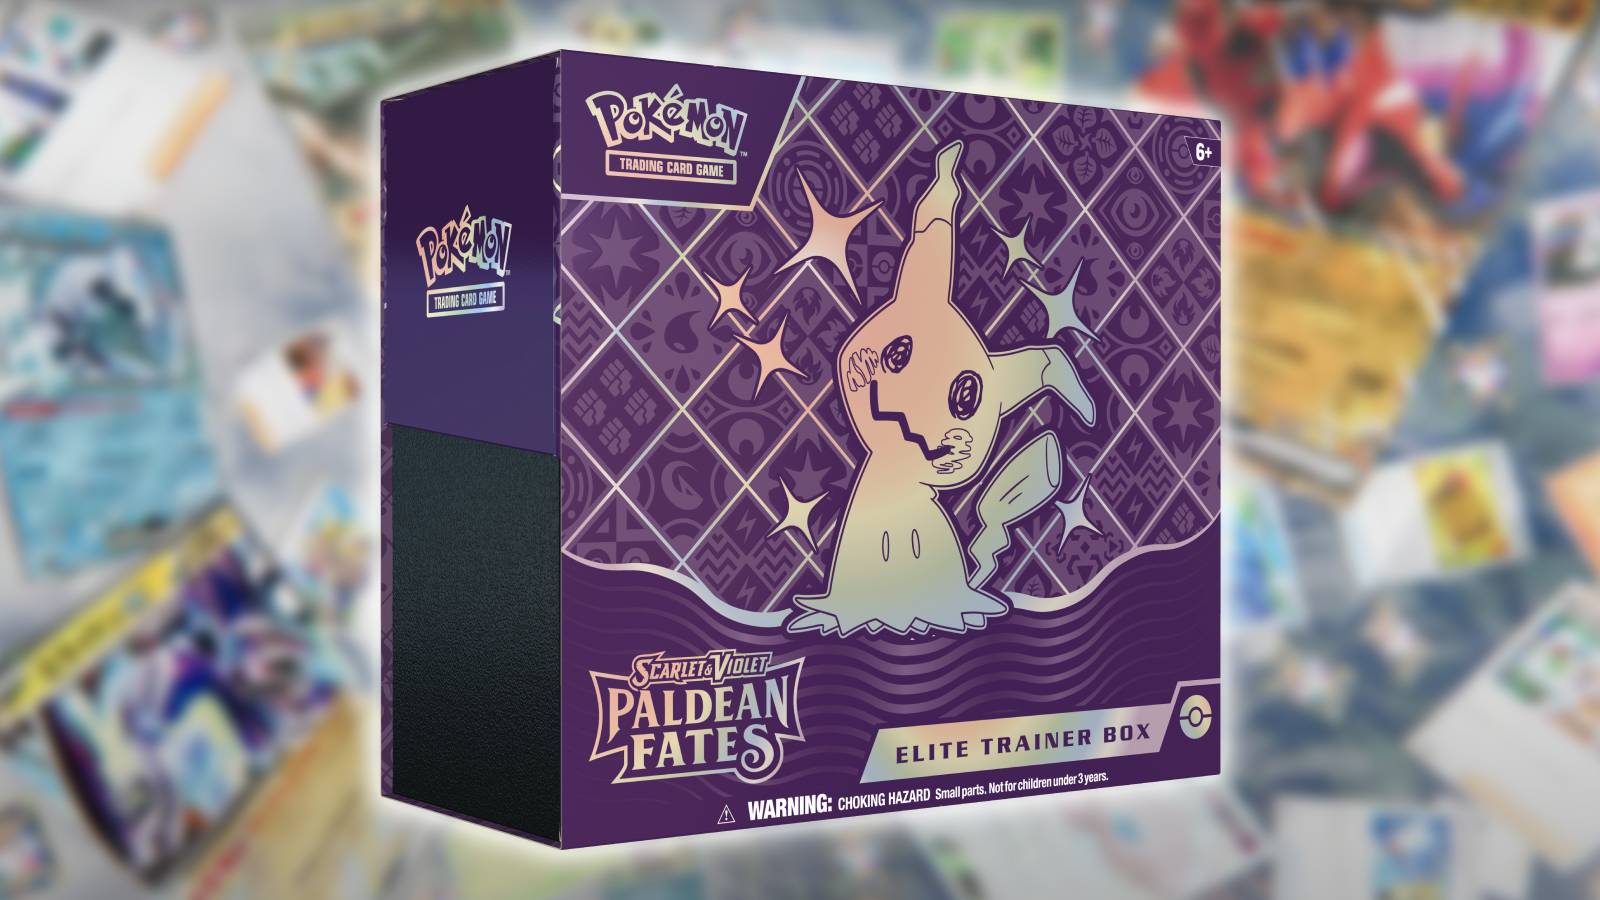 The Pokemon TCG Paldean Fates Elite Trainer Box is visible against a blurred background